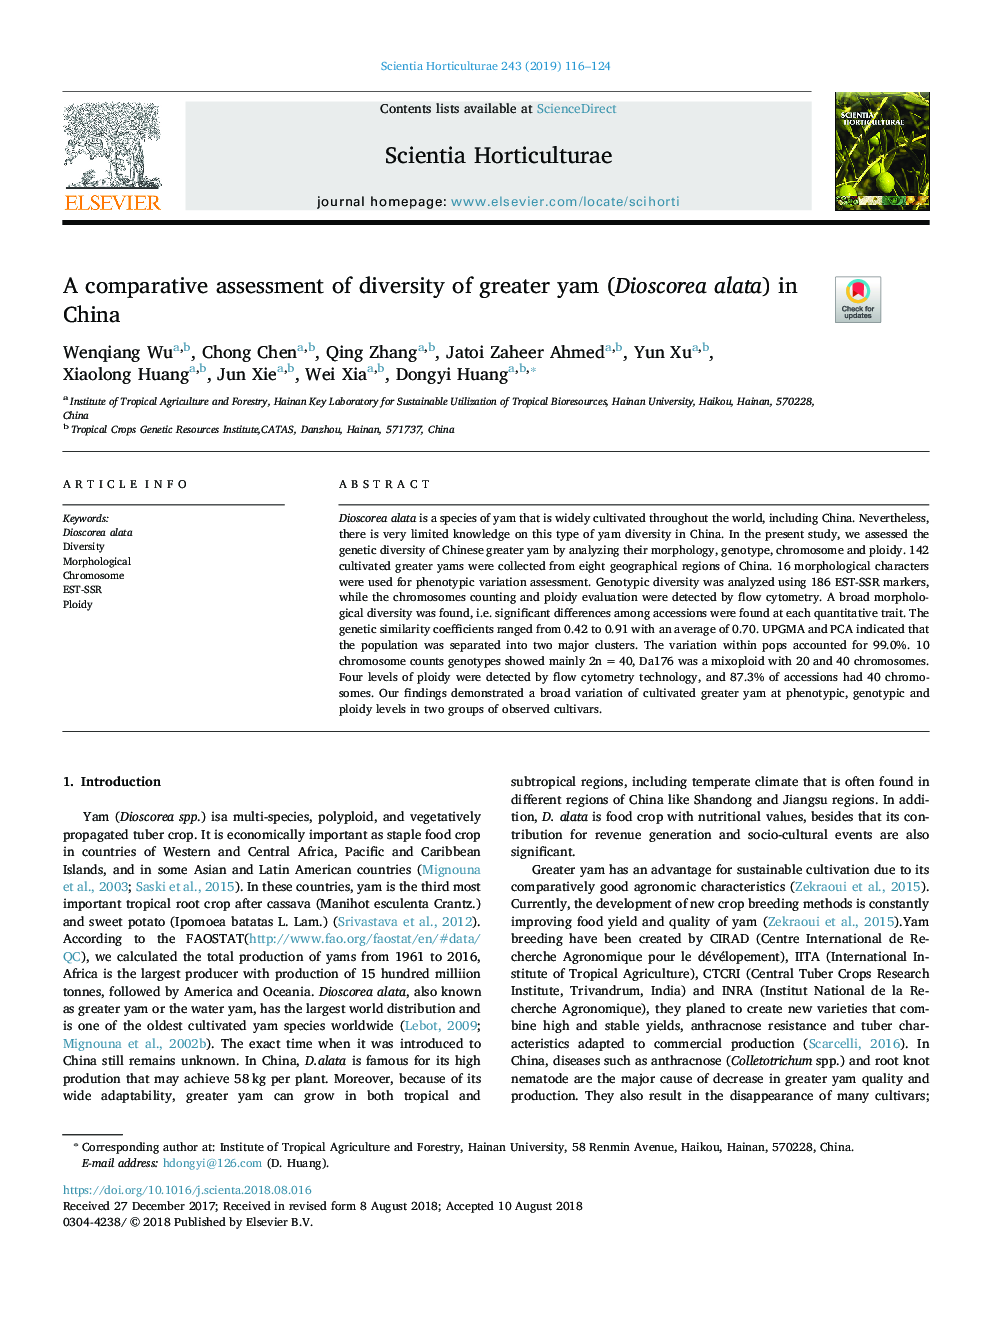 A comparative assessment of diversity of greater yam (Dioscorea alata) in China